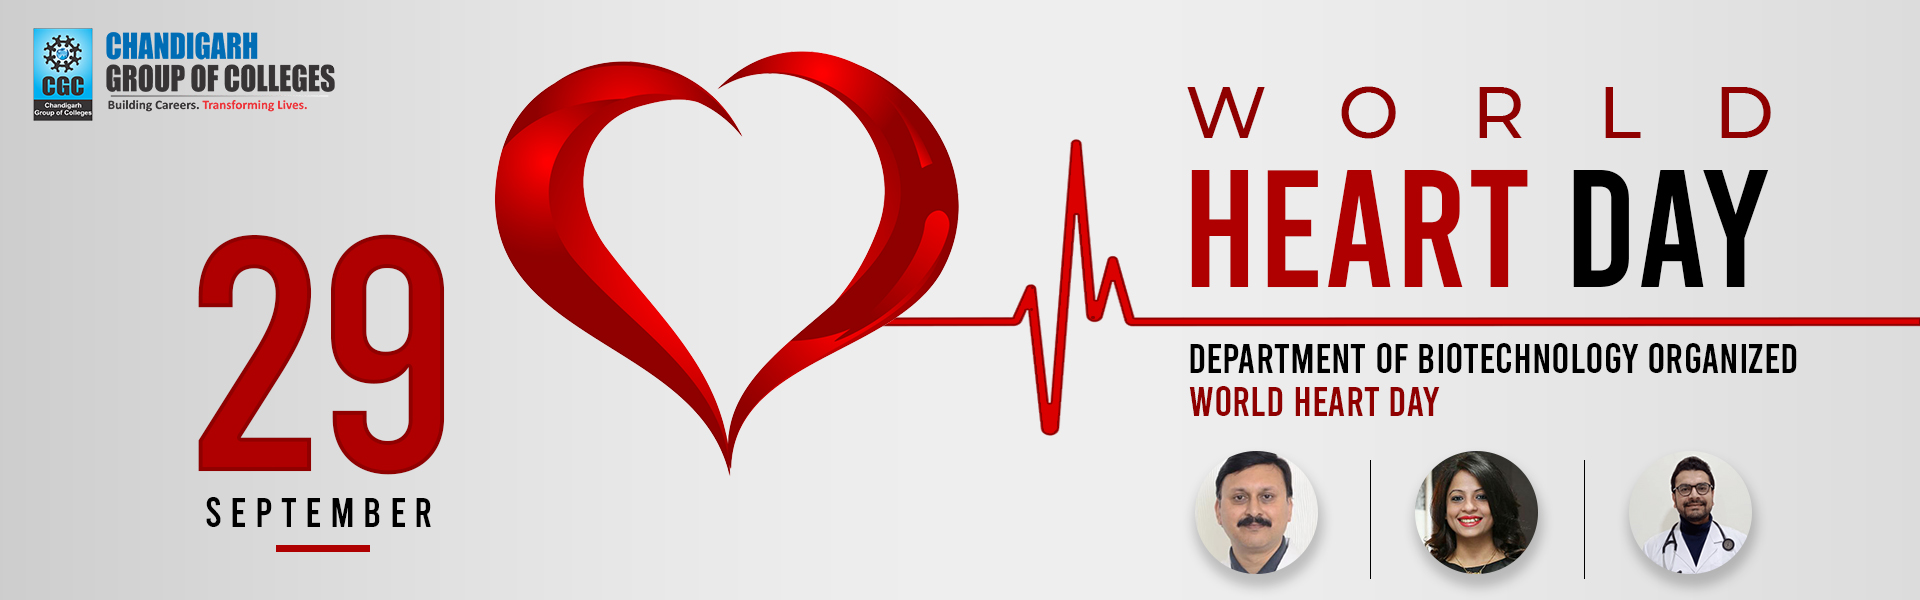 Department of Biotechnology organized World Heart day 